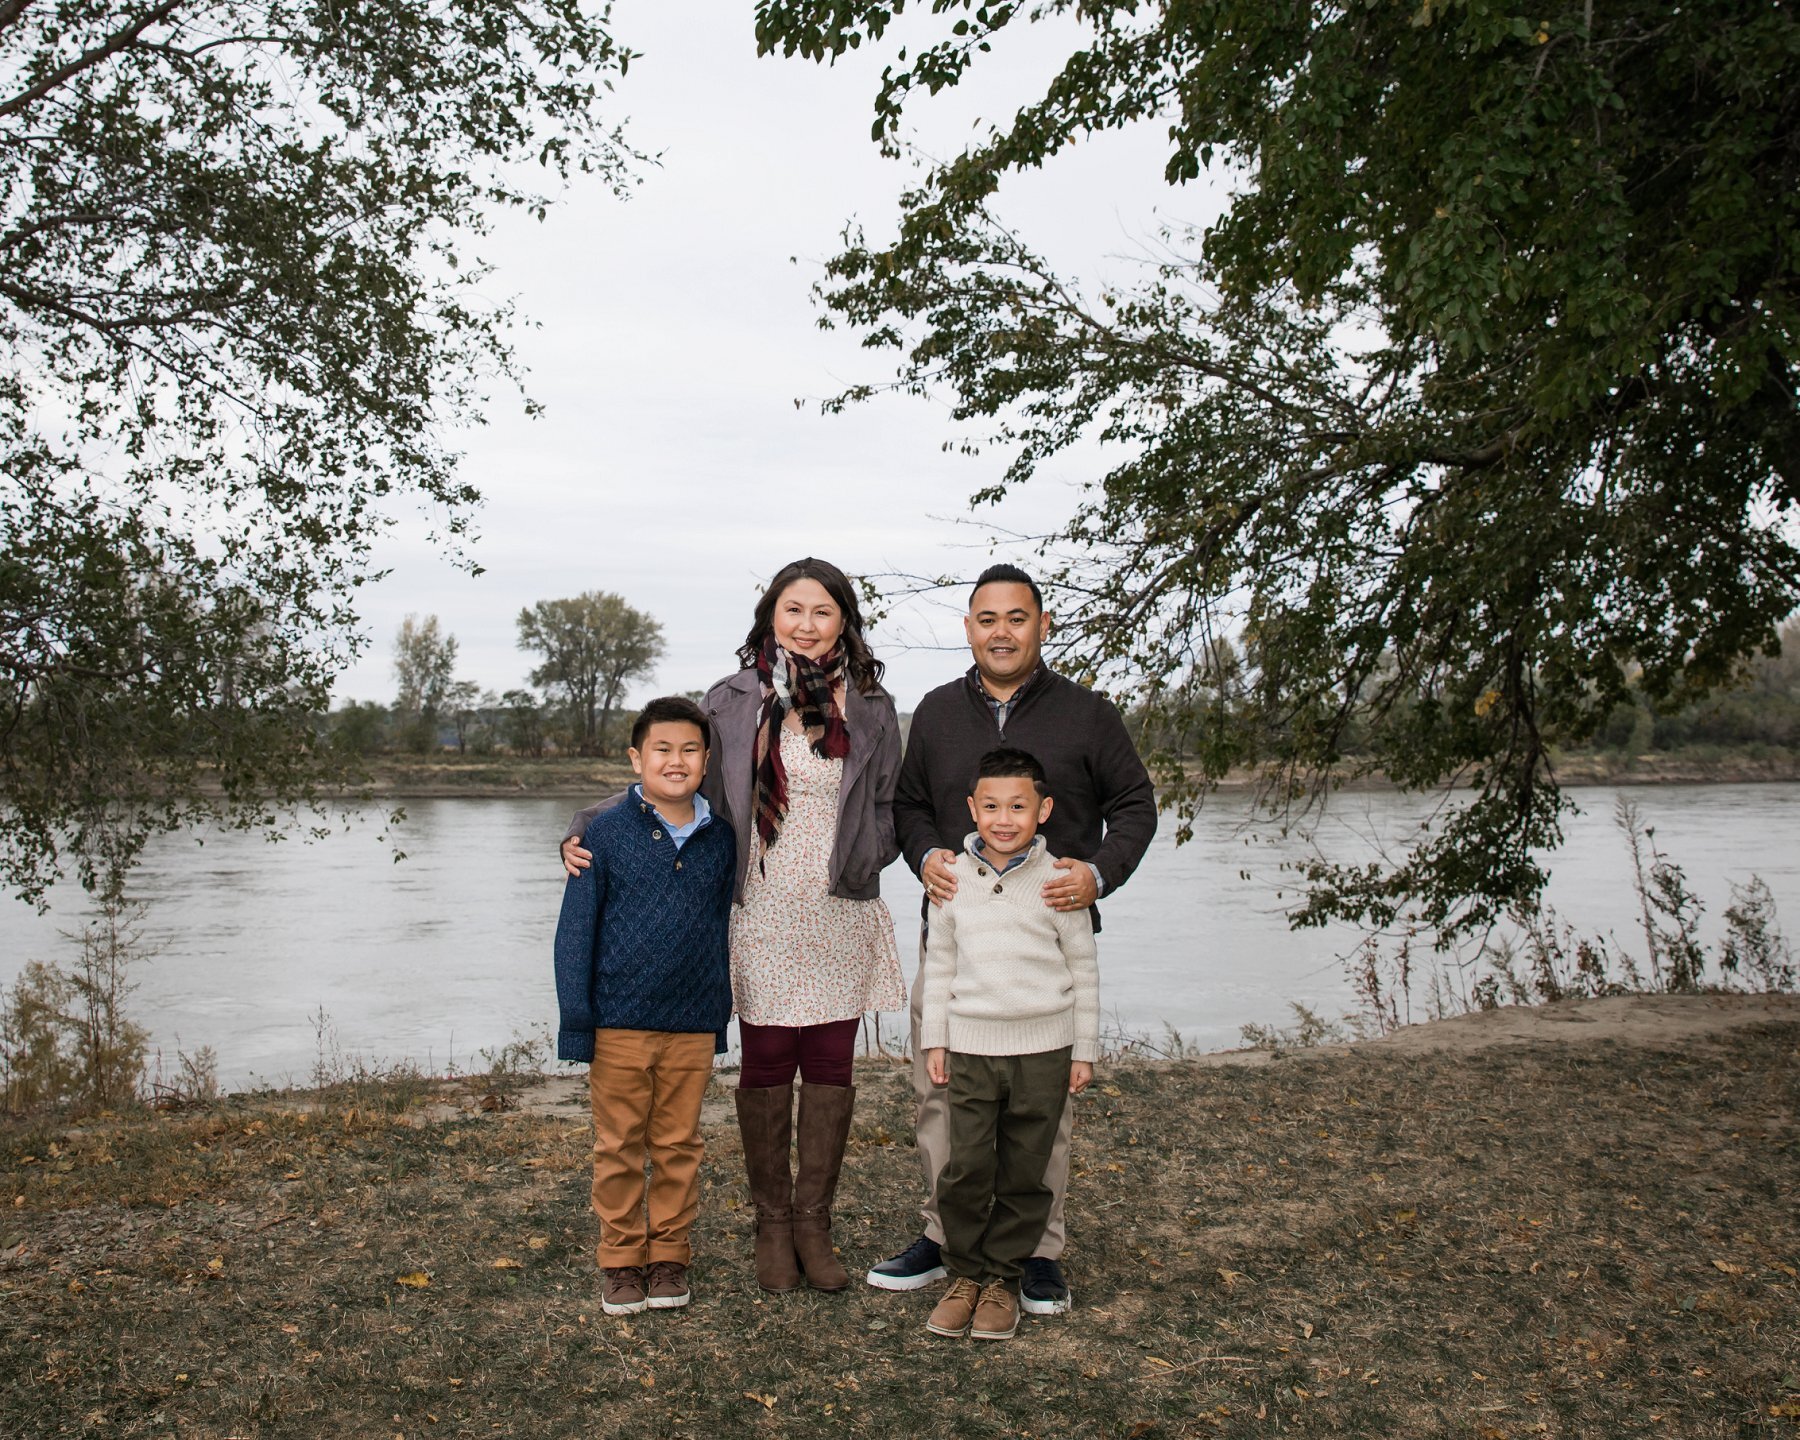 Fall Family Photography by River in Kansas City 20